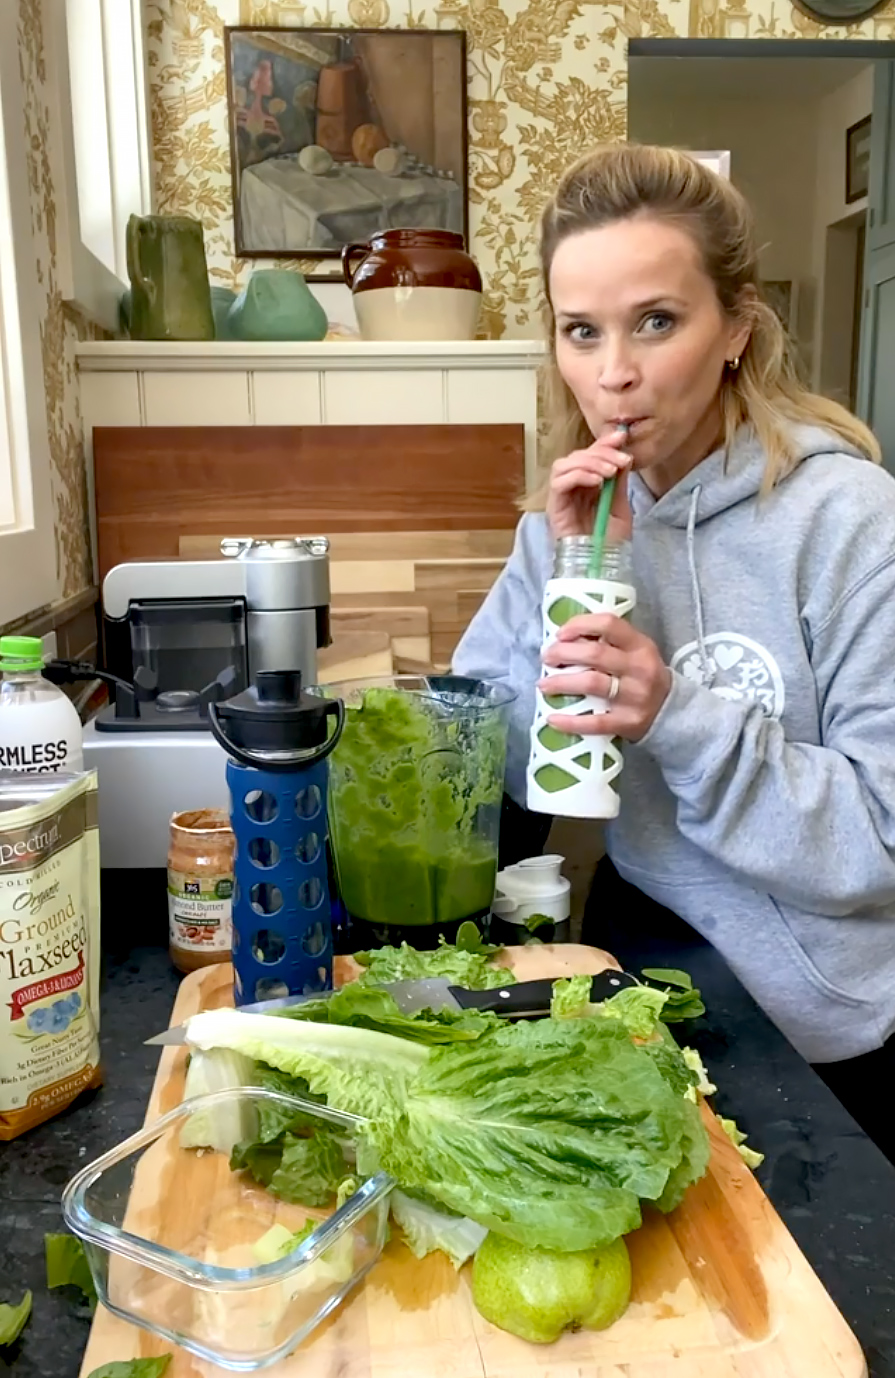 Reese Witherspoon Shares Recipe for the Smoothie She Drinks Everyday